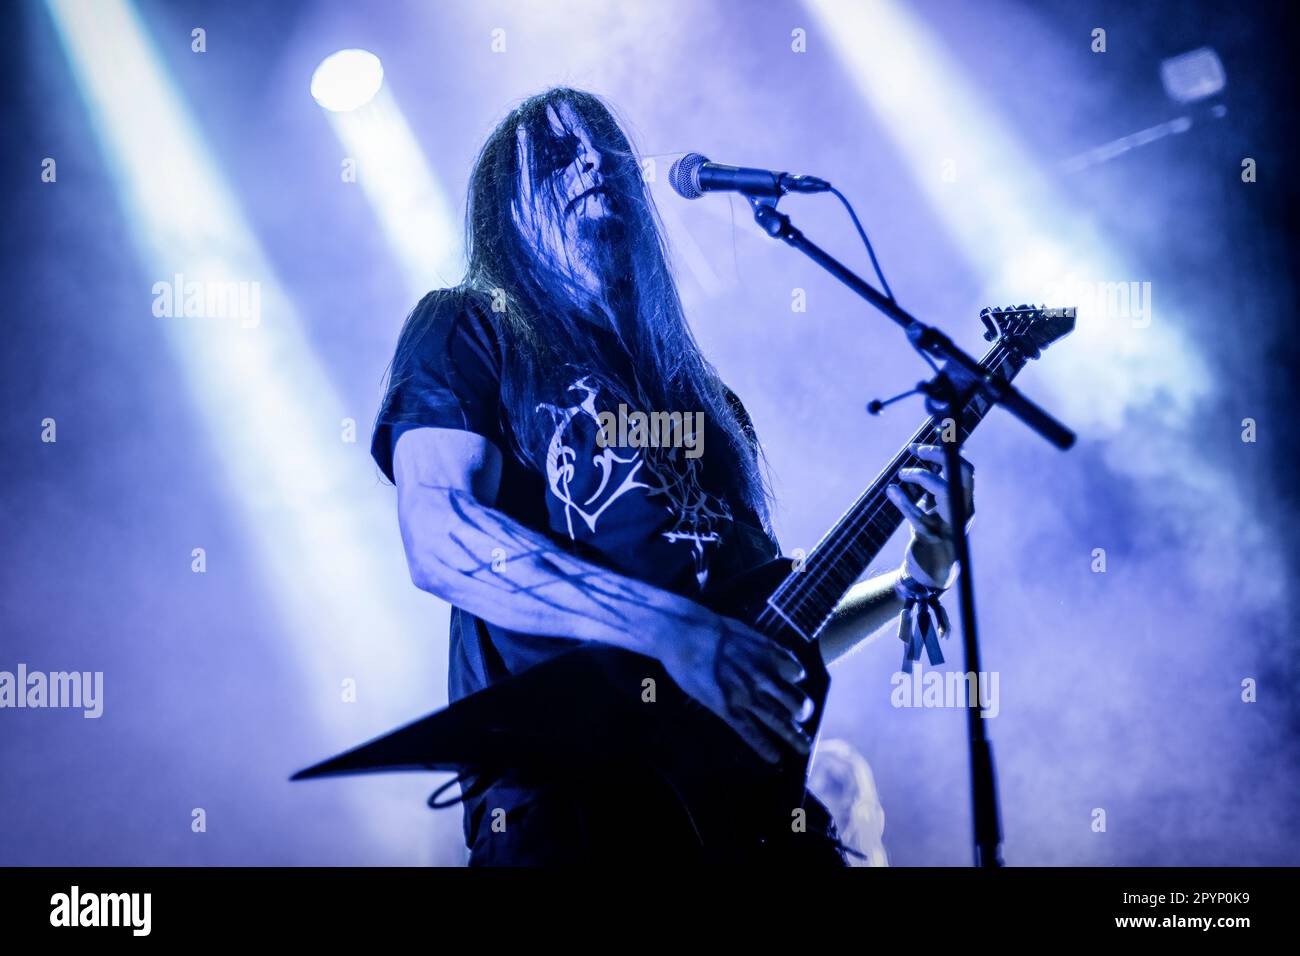 The Norwegian symphonic black metal band Dimmu Borgir performs live at Oslo  Spektrum. Here vocalist Shagrath is seen live on stage. Norway, 28/05 2011  Stock Photo - Alamy